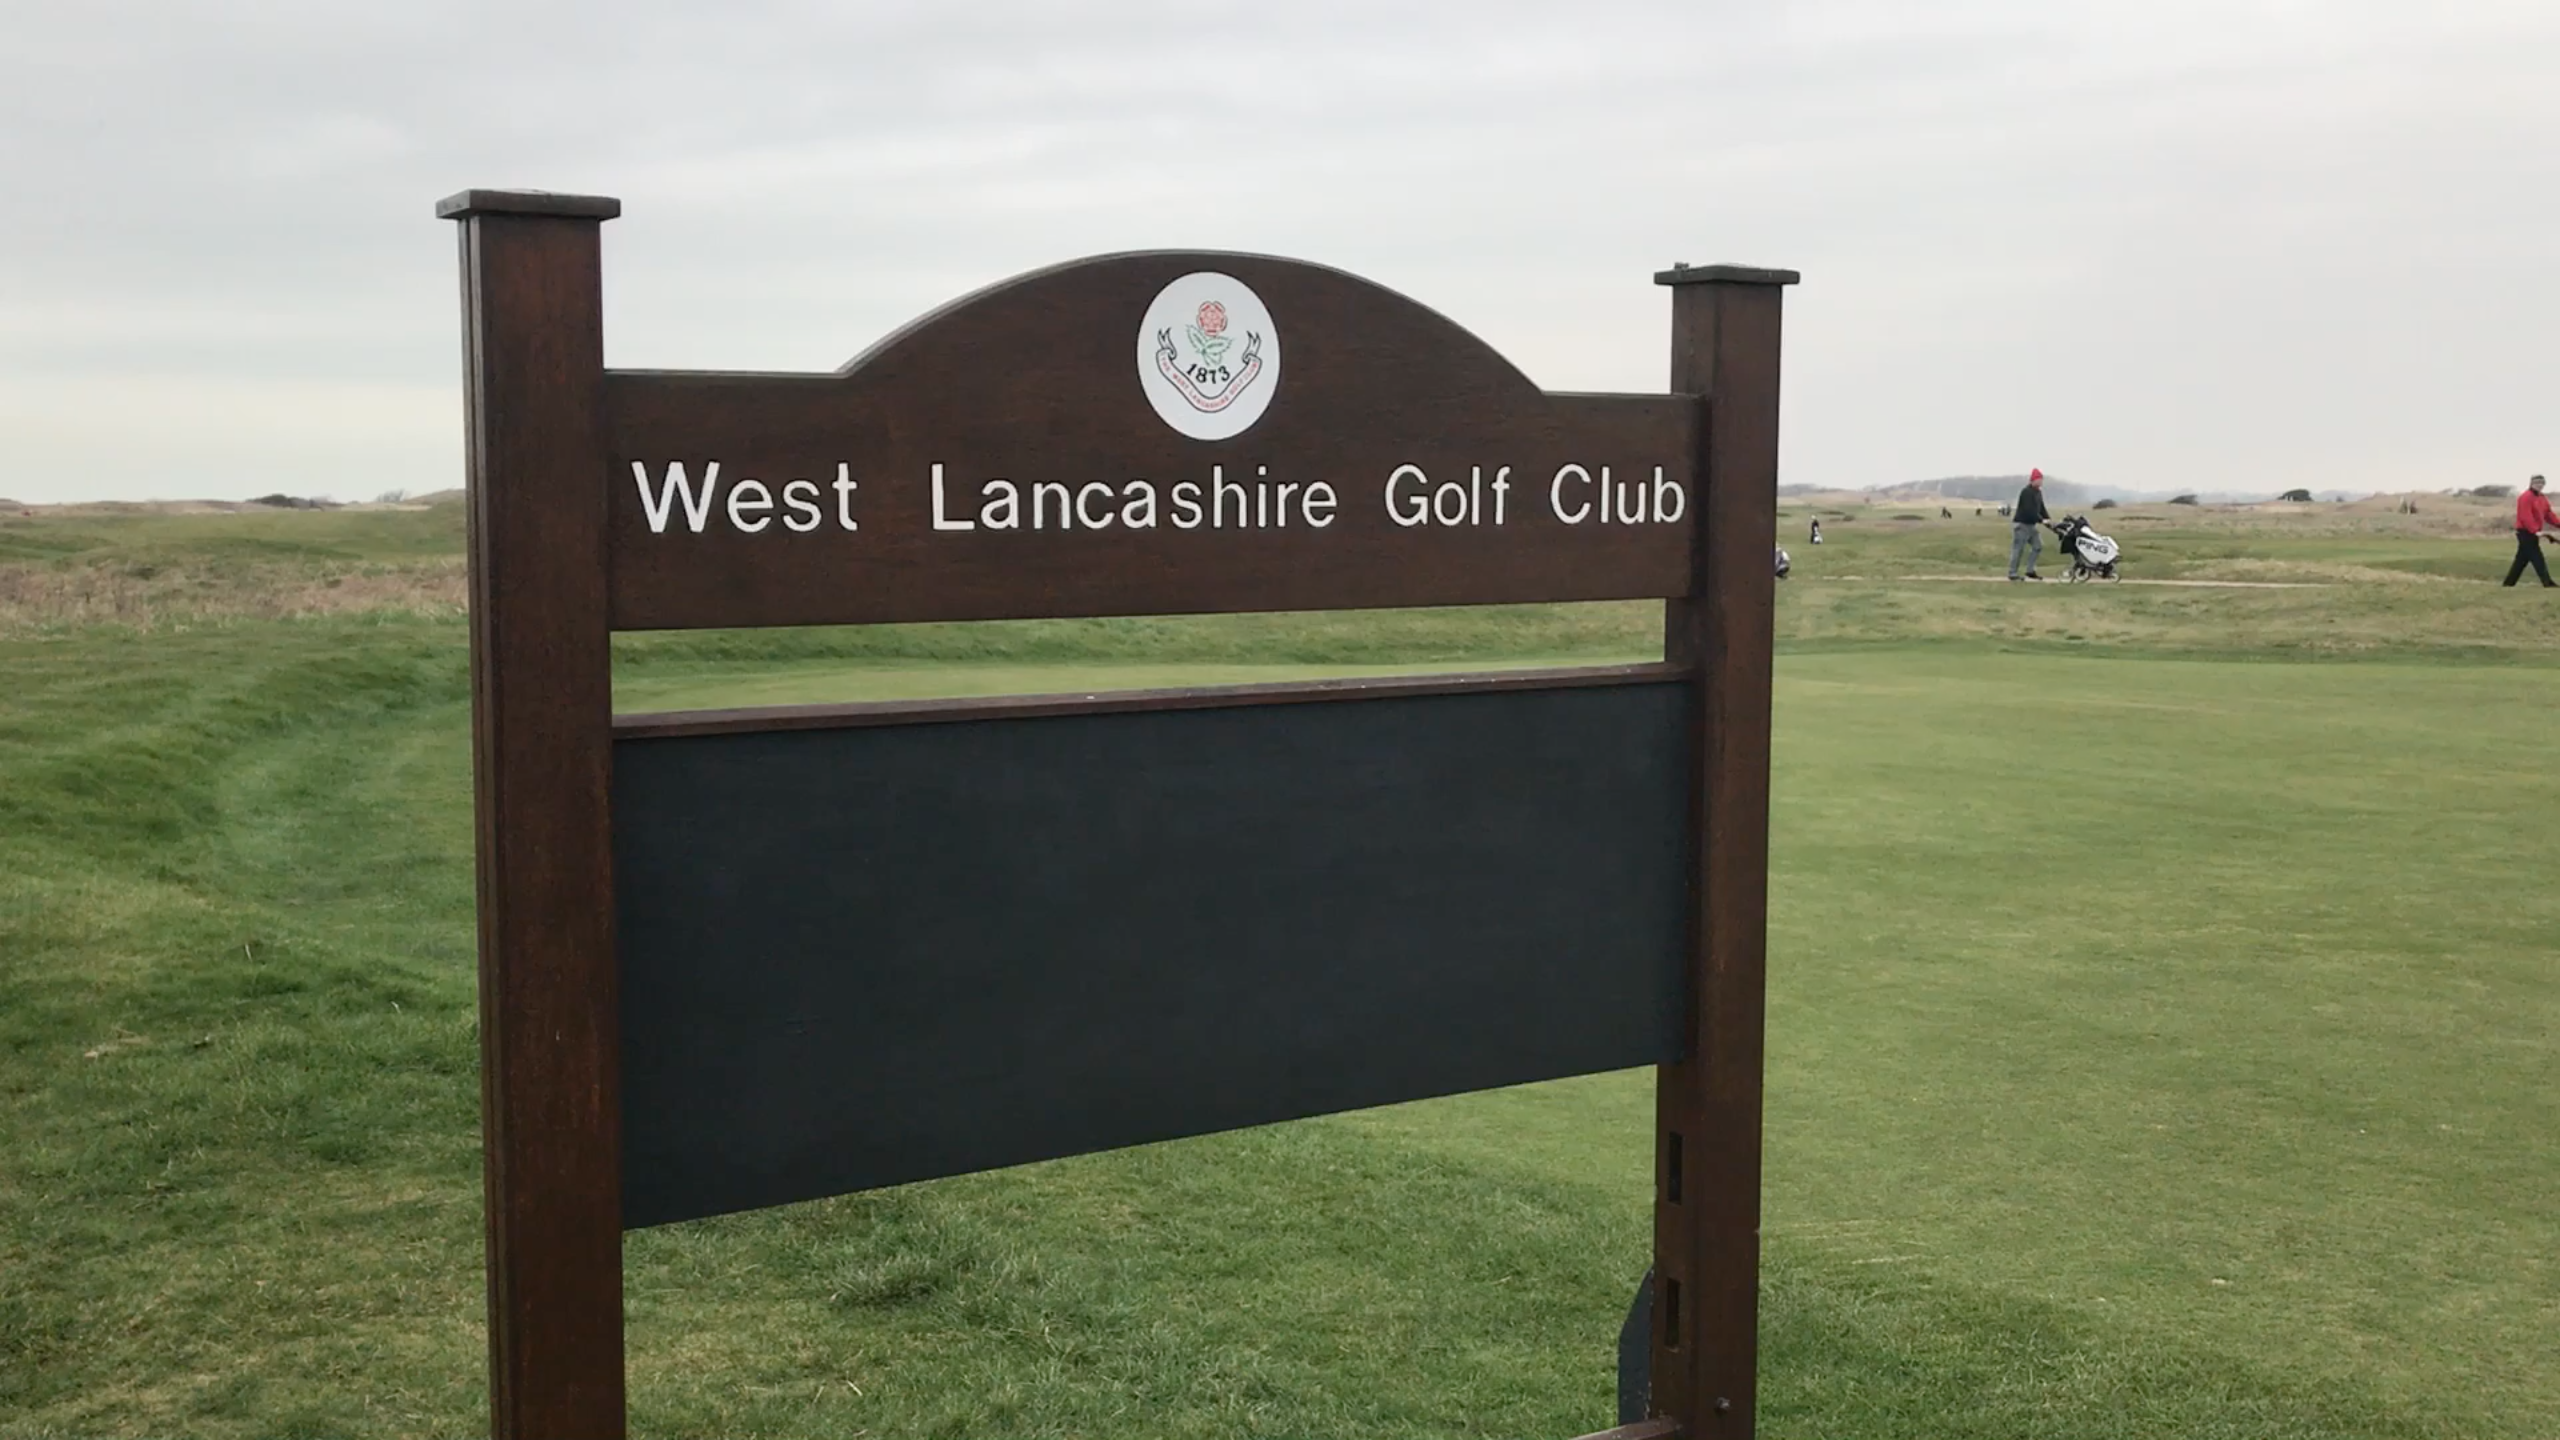 Played by NCG: West Lancashire